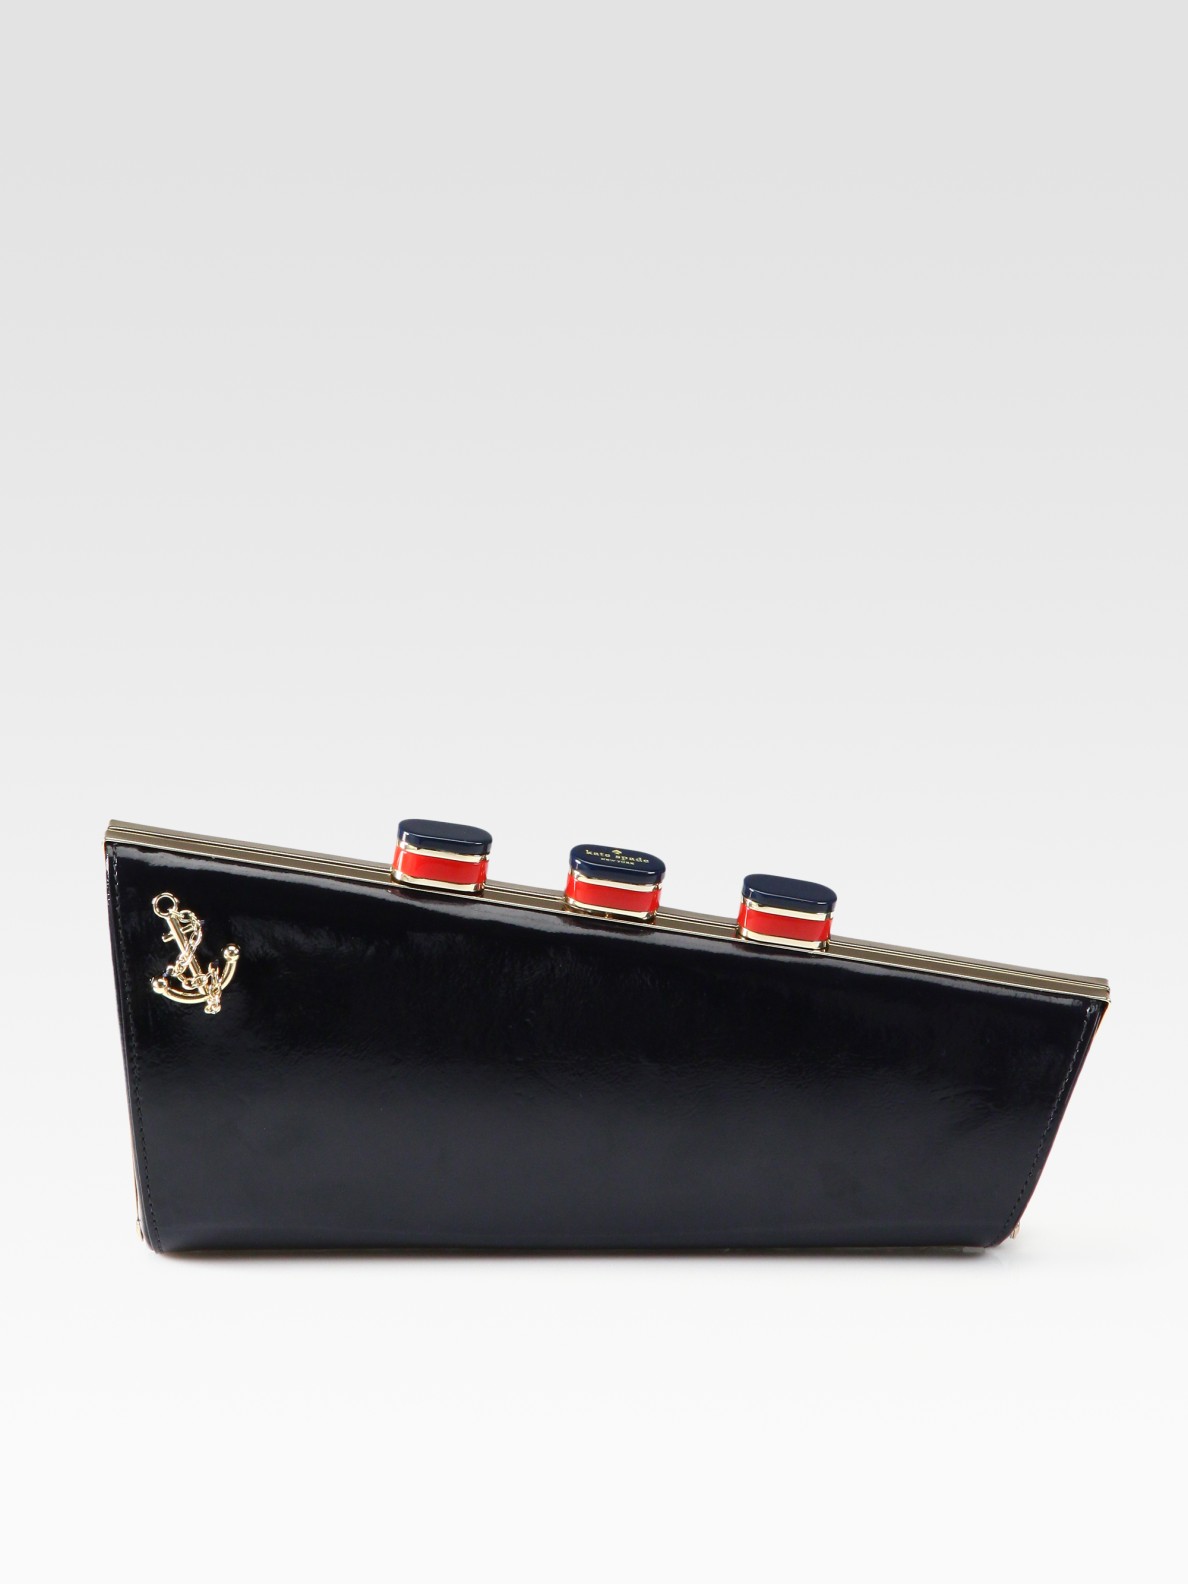 Kate Spade Ship Patent Leather Clutch in Black | Lyst